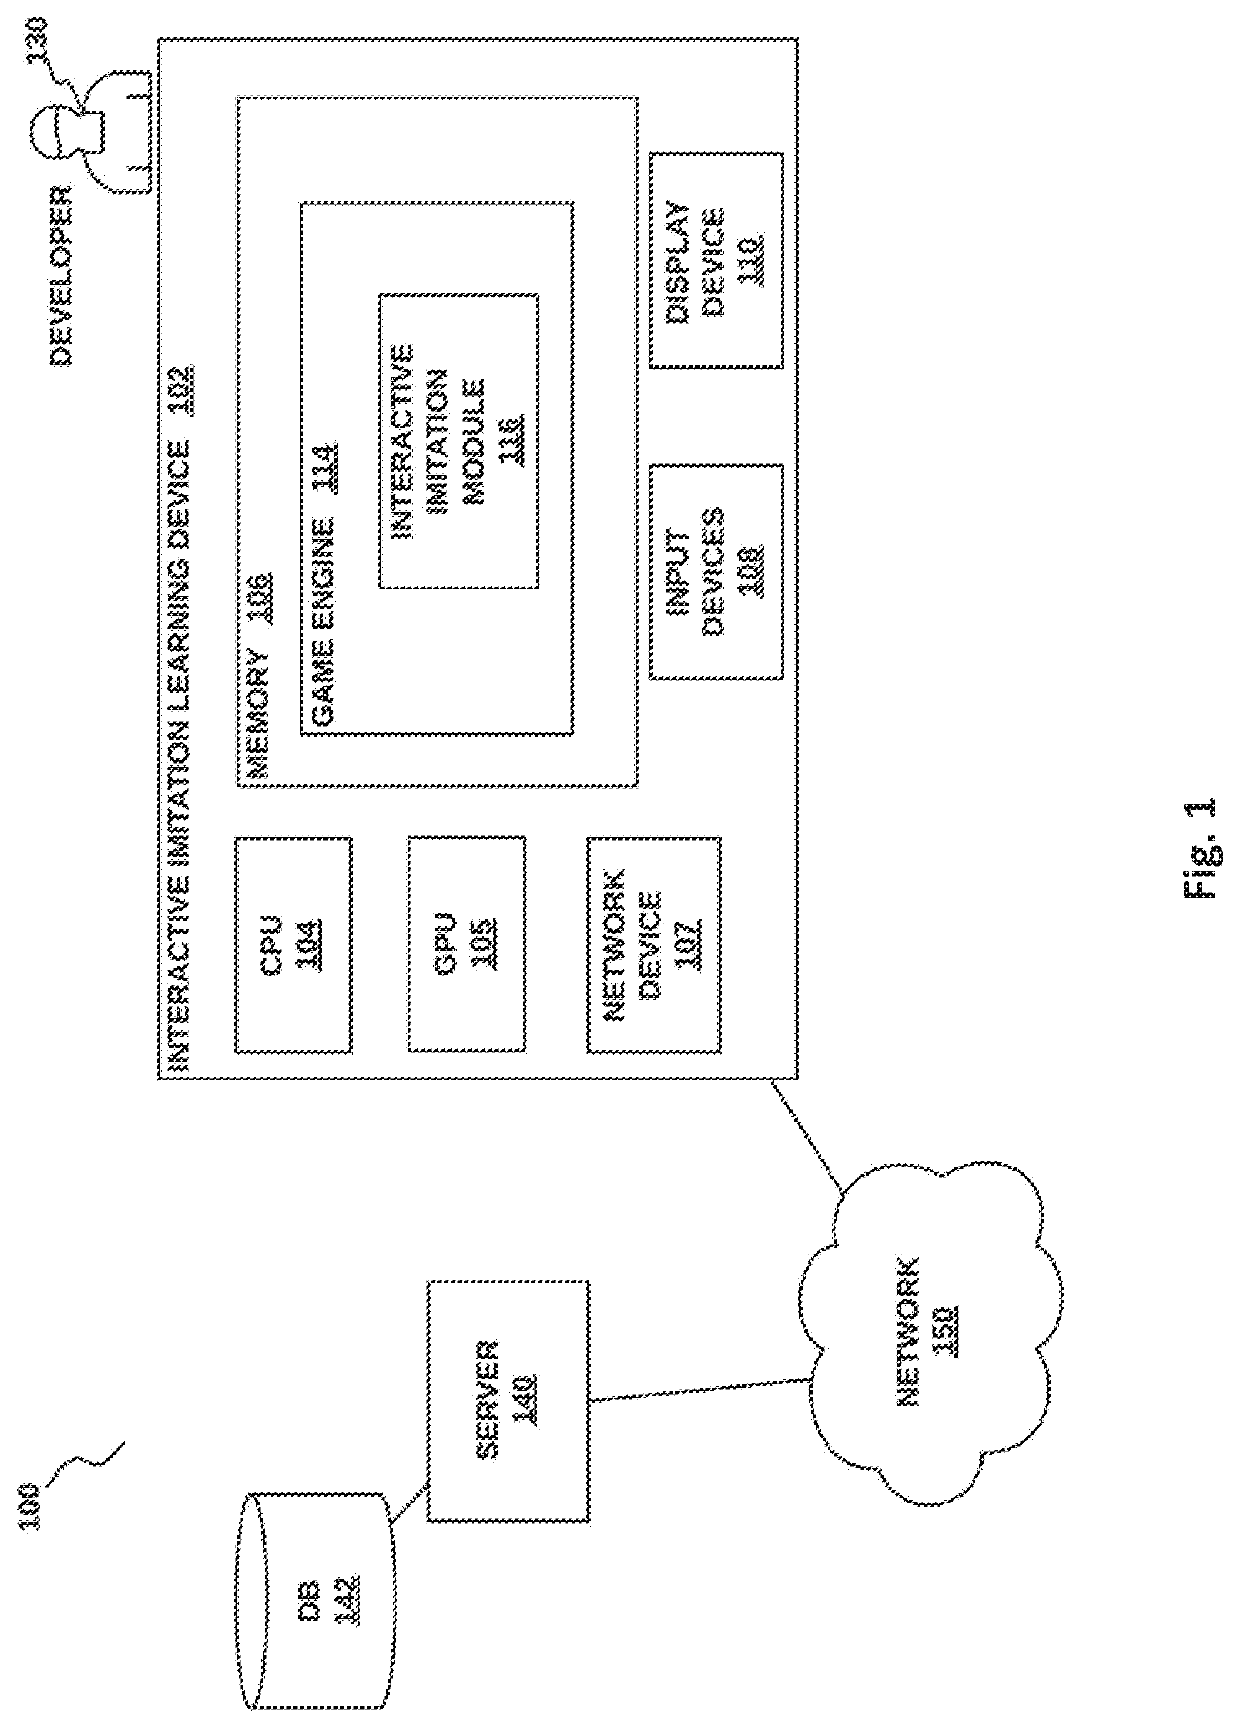 Method and system for interactive imitation learning in video games